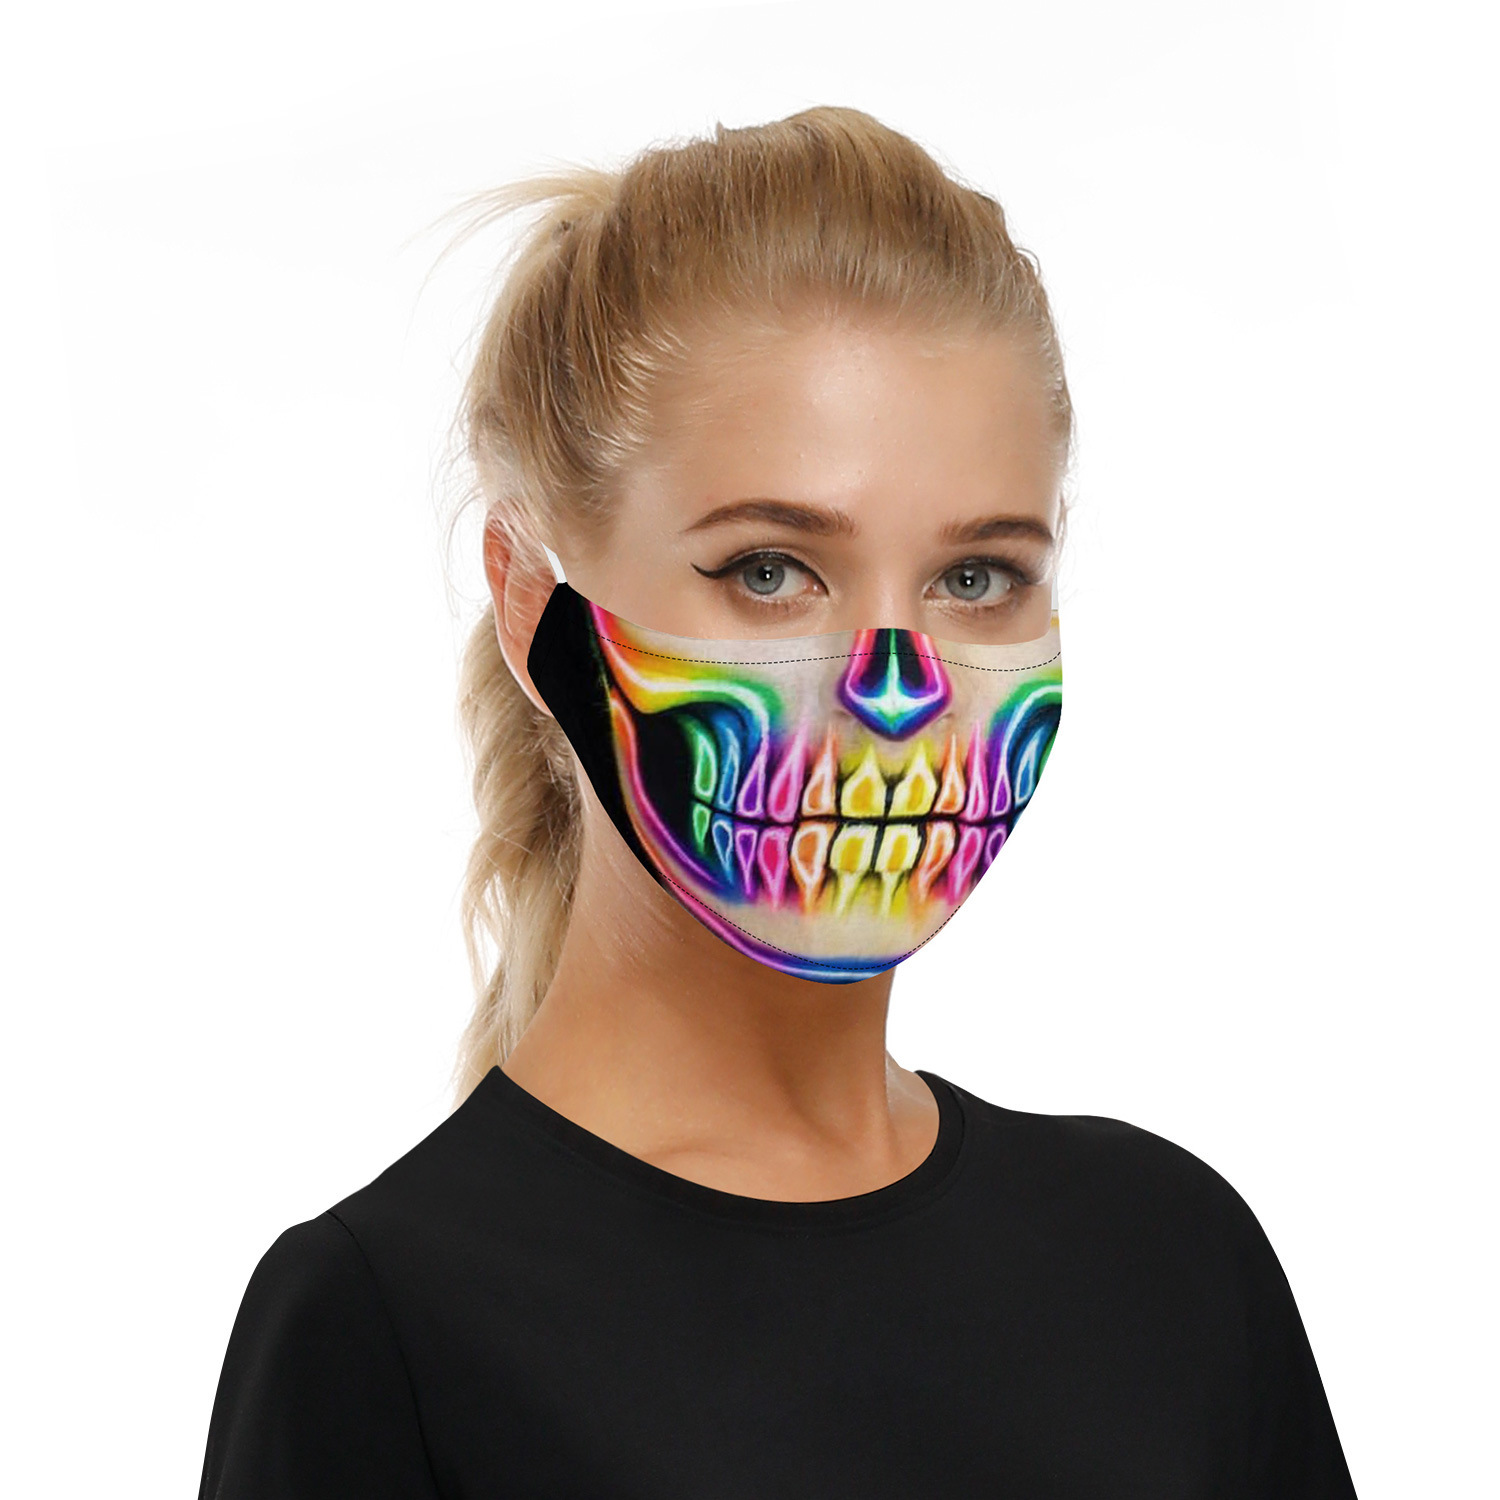 Halloween-series-Double-Chip-Anti-PM25-Dust-proof-Face-Mask-Breathable-Protective-Mask-Windproof-For-1664901-7